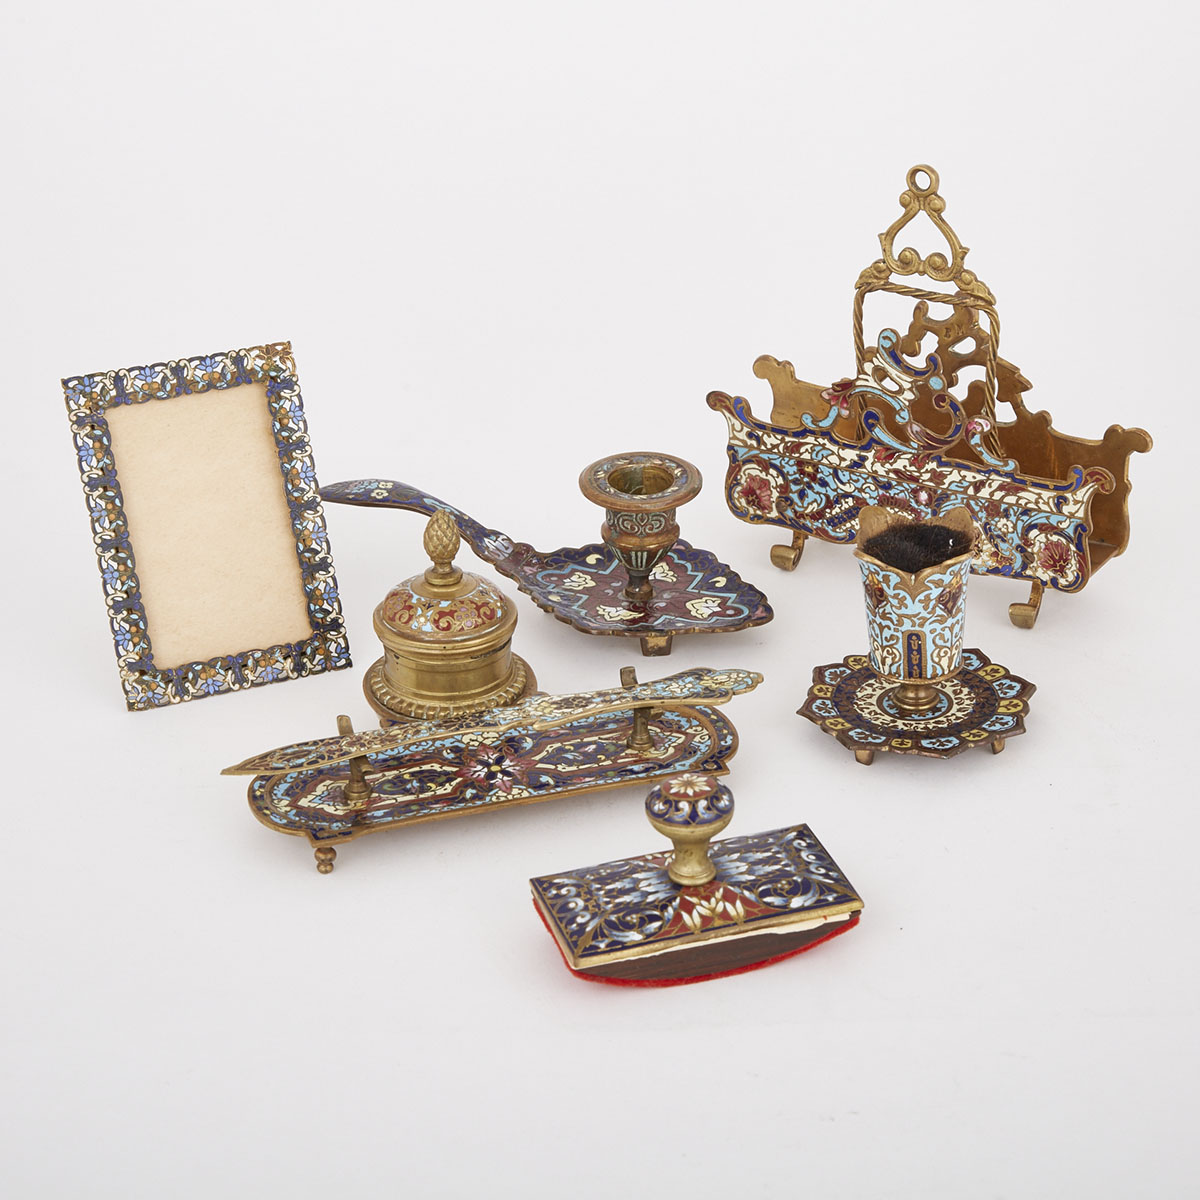 Seven Piece French Champleve Enamelled Desk Set, 19th century